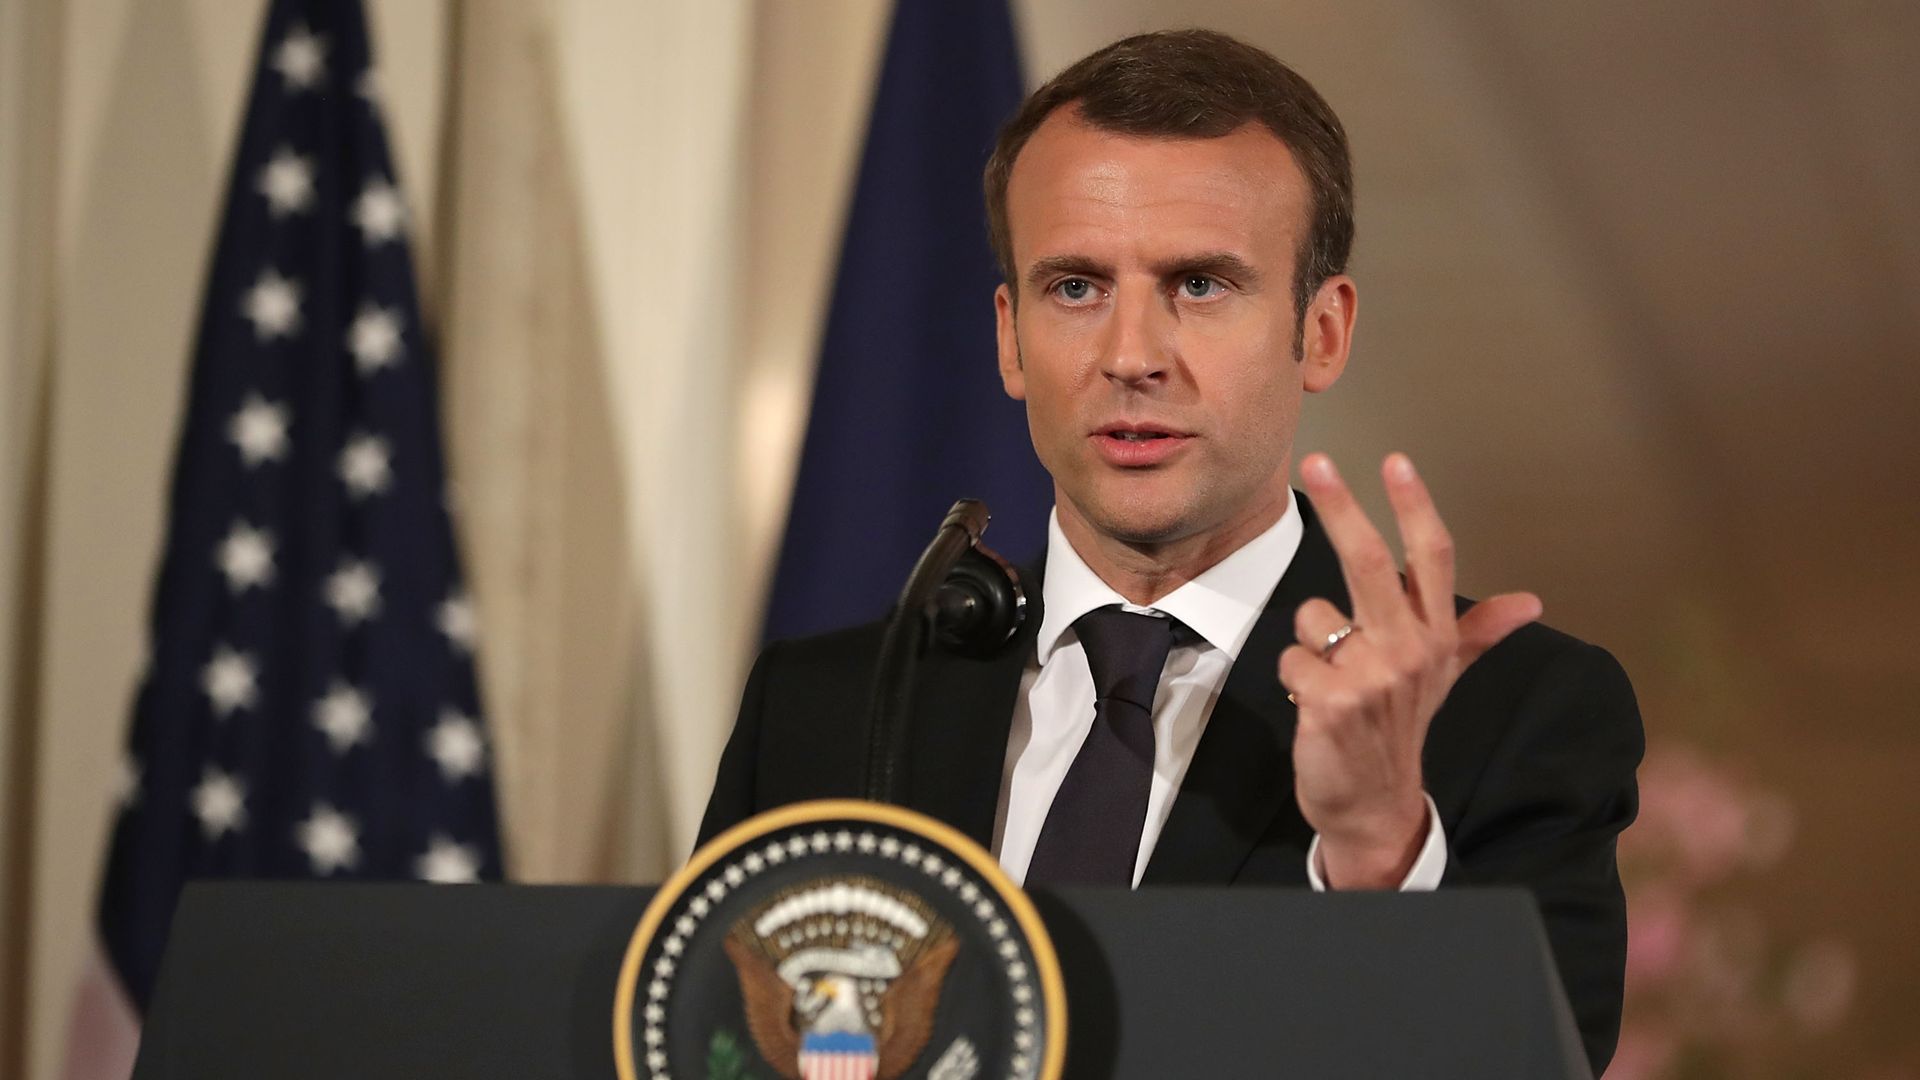 French President Emmanuel Macron speaking at White House lectern and making hand gesture